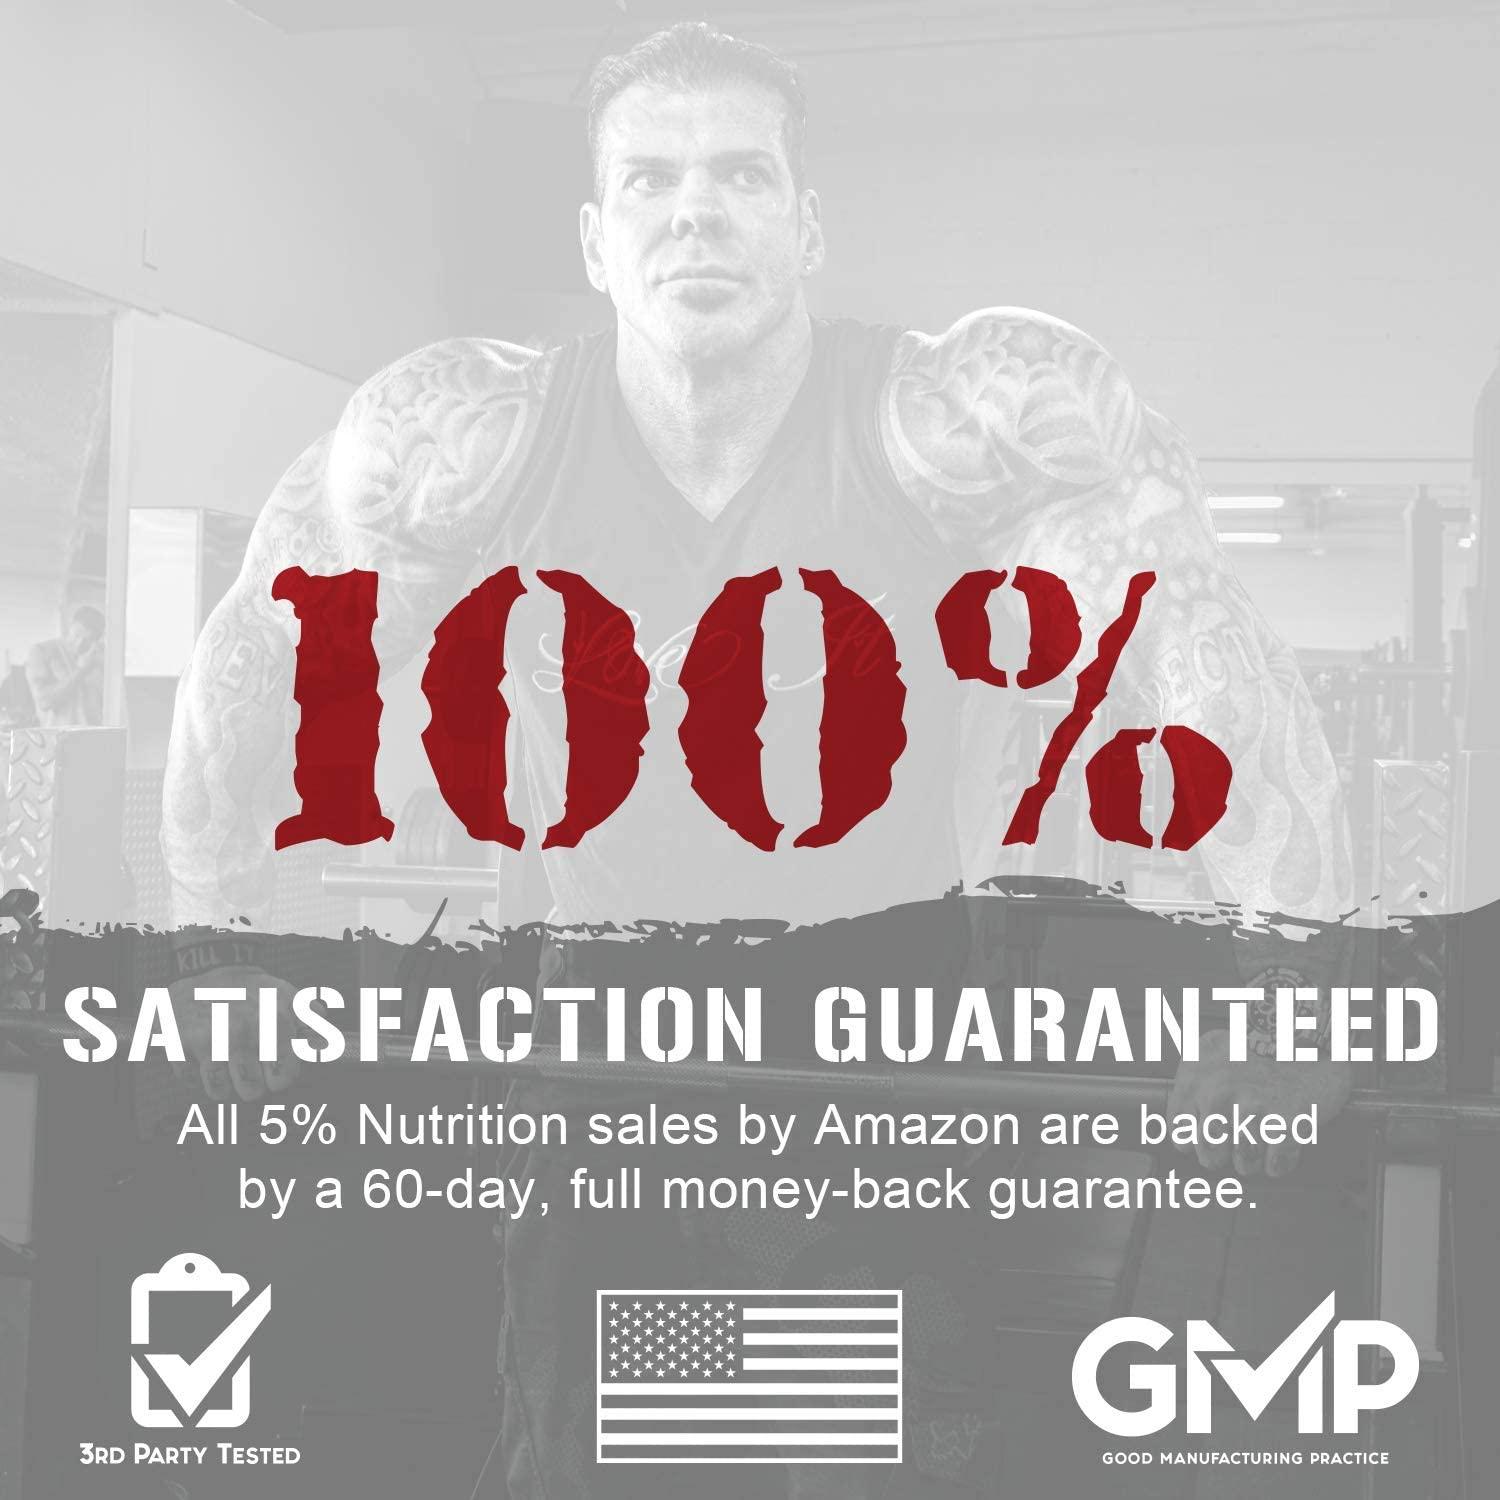 5% Nutrition All Day You May 30 Servings - Best Price Nutrition